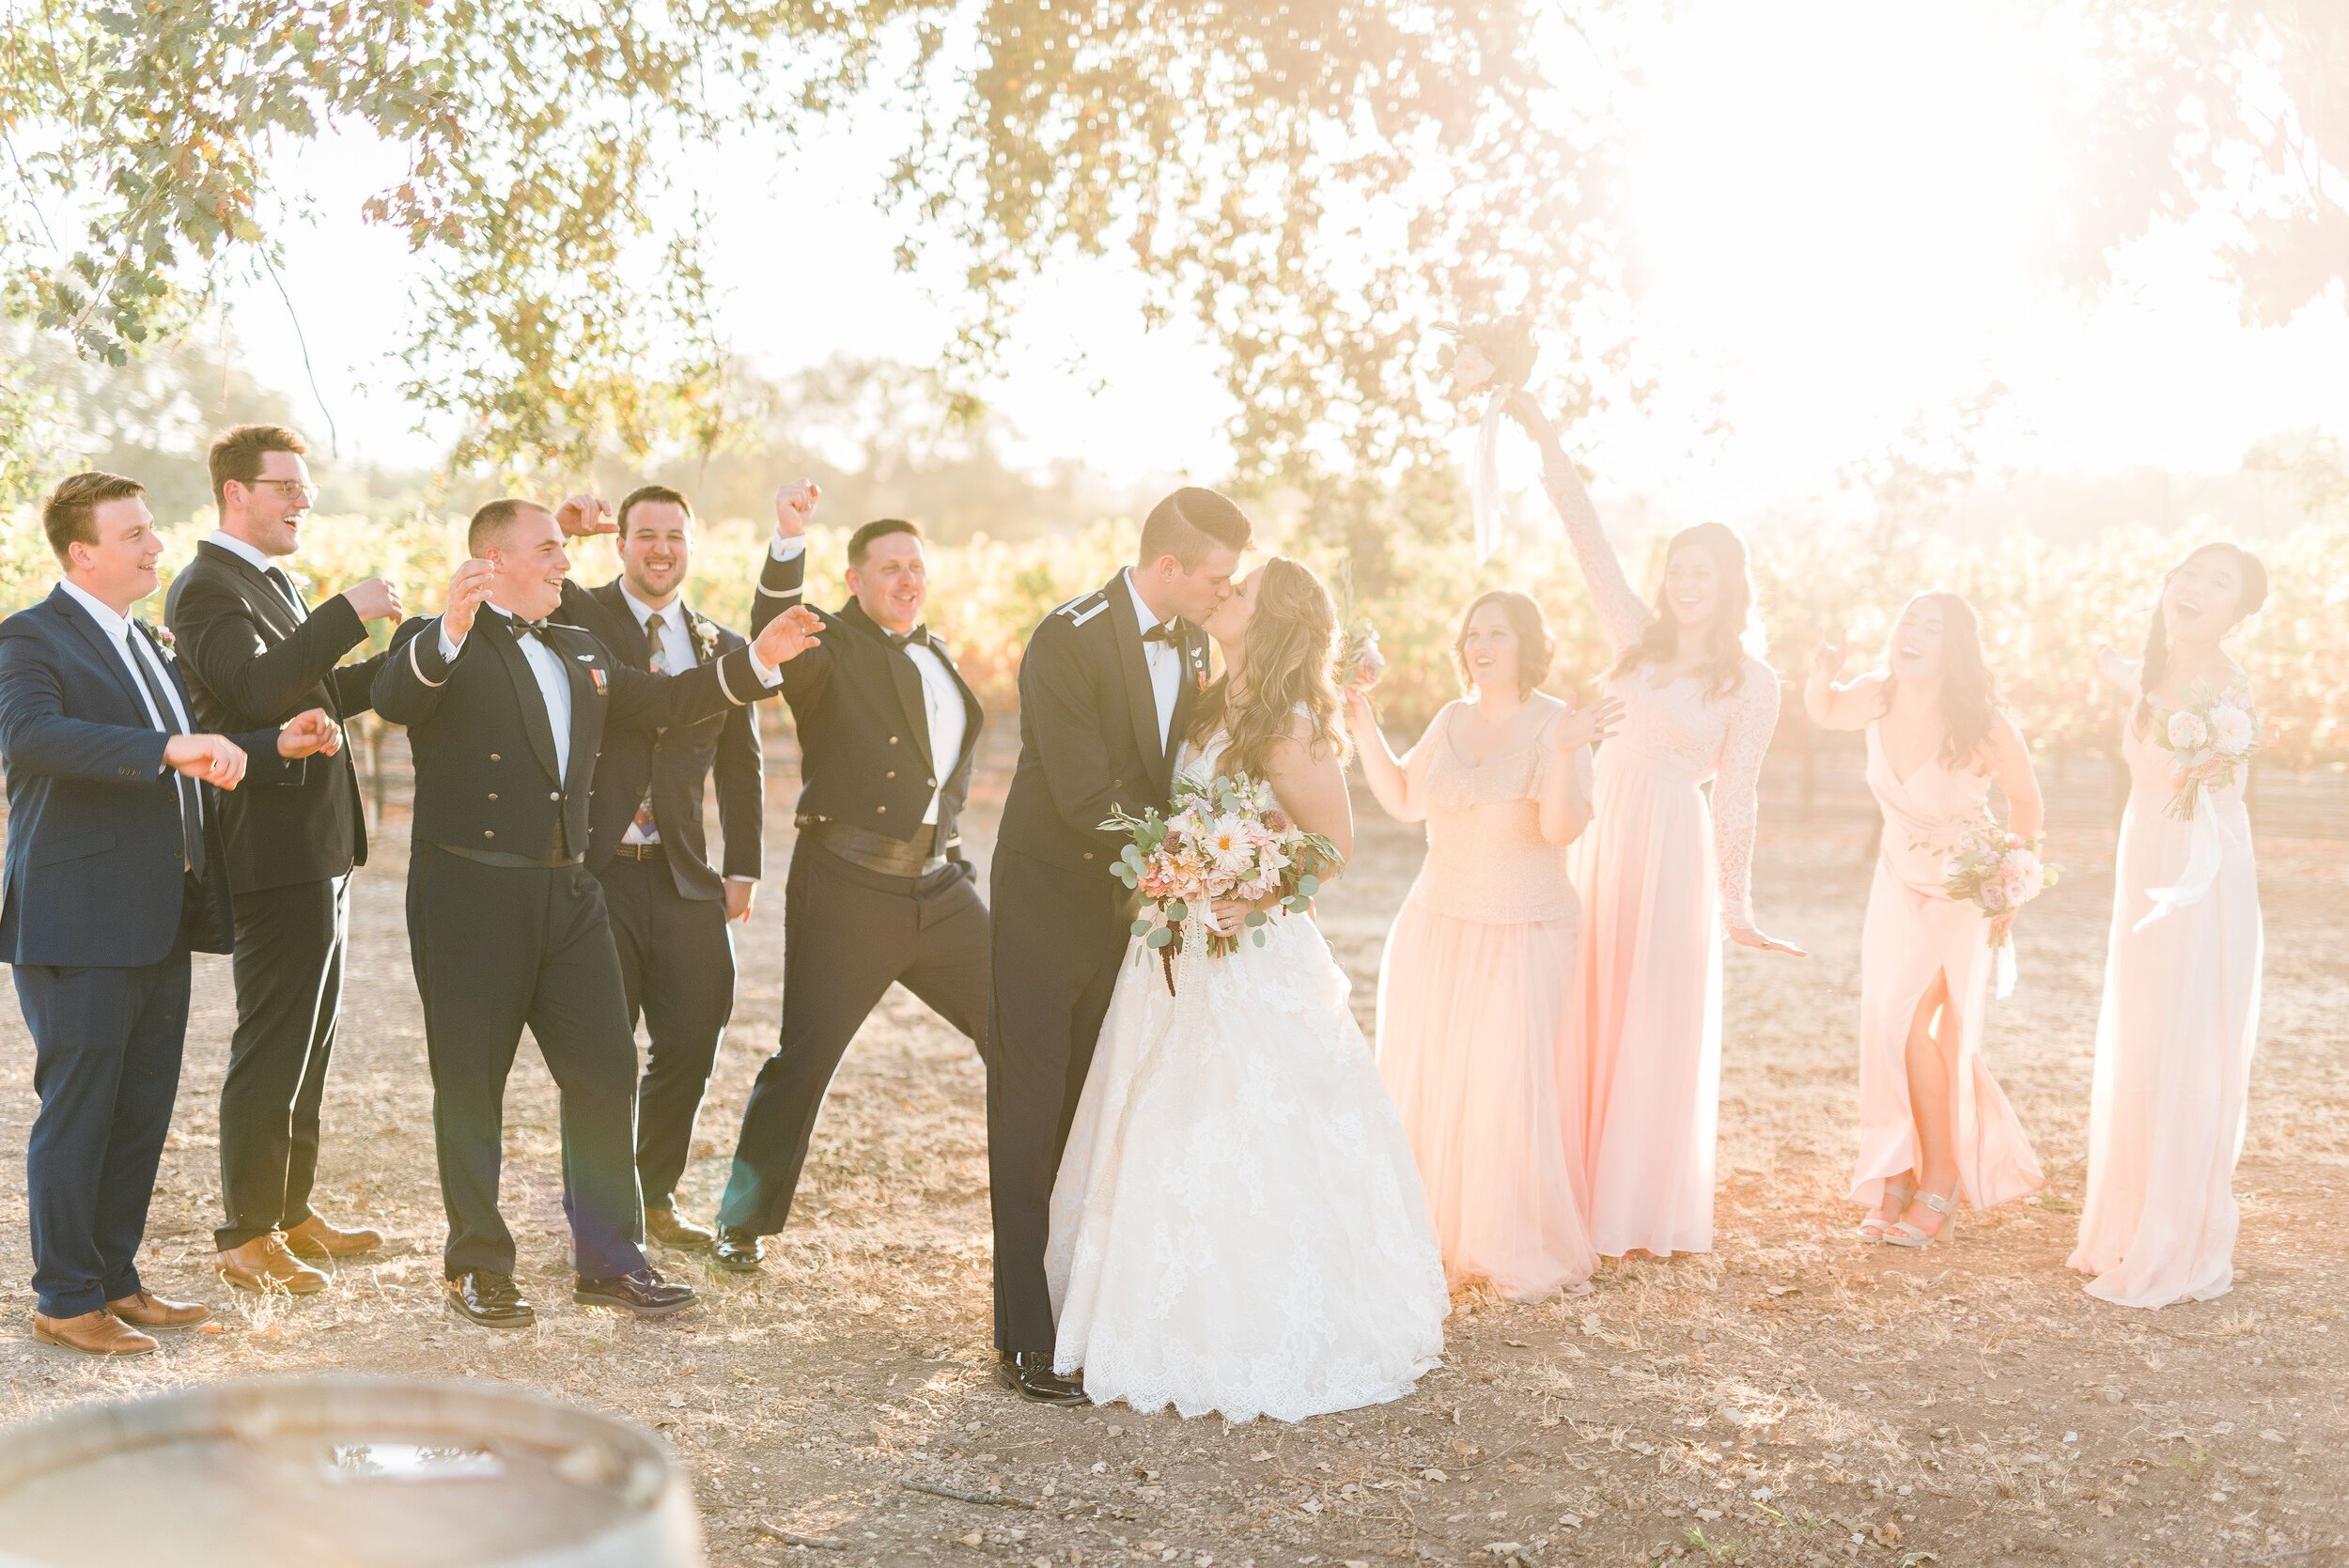 www.santabarbarawedding.com | Roblar Winery and Farm | Brittany Taylor Photography | Bride and Groom Kiss Surrounded by Wedding Party 